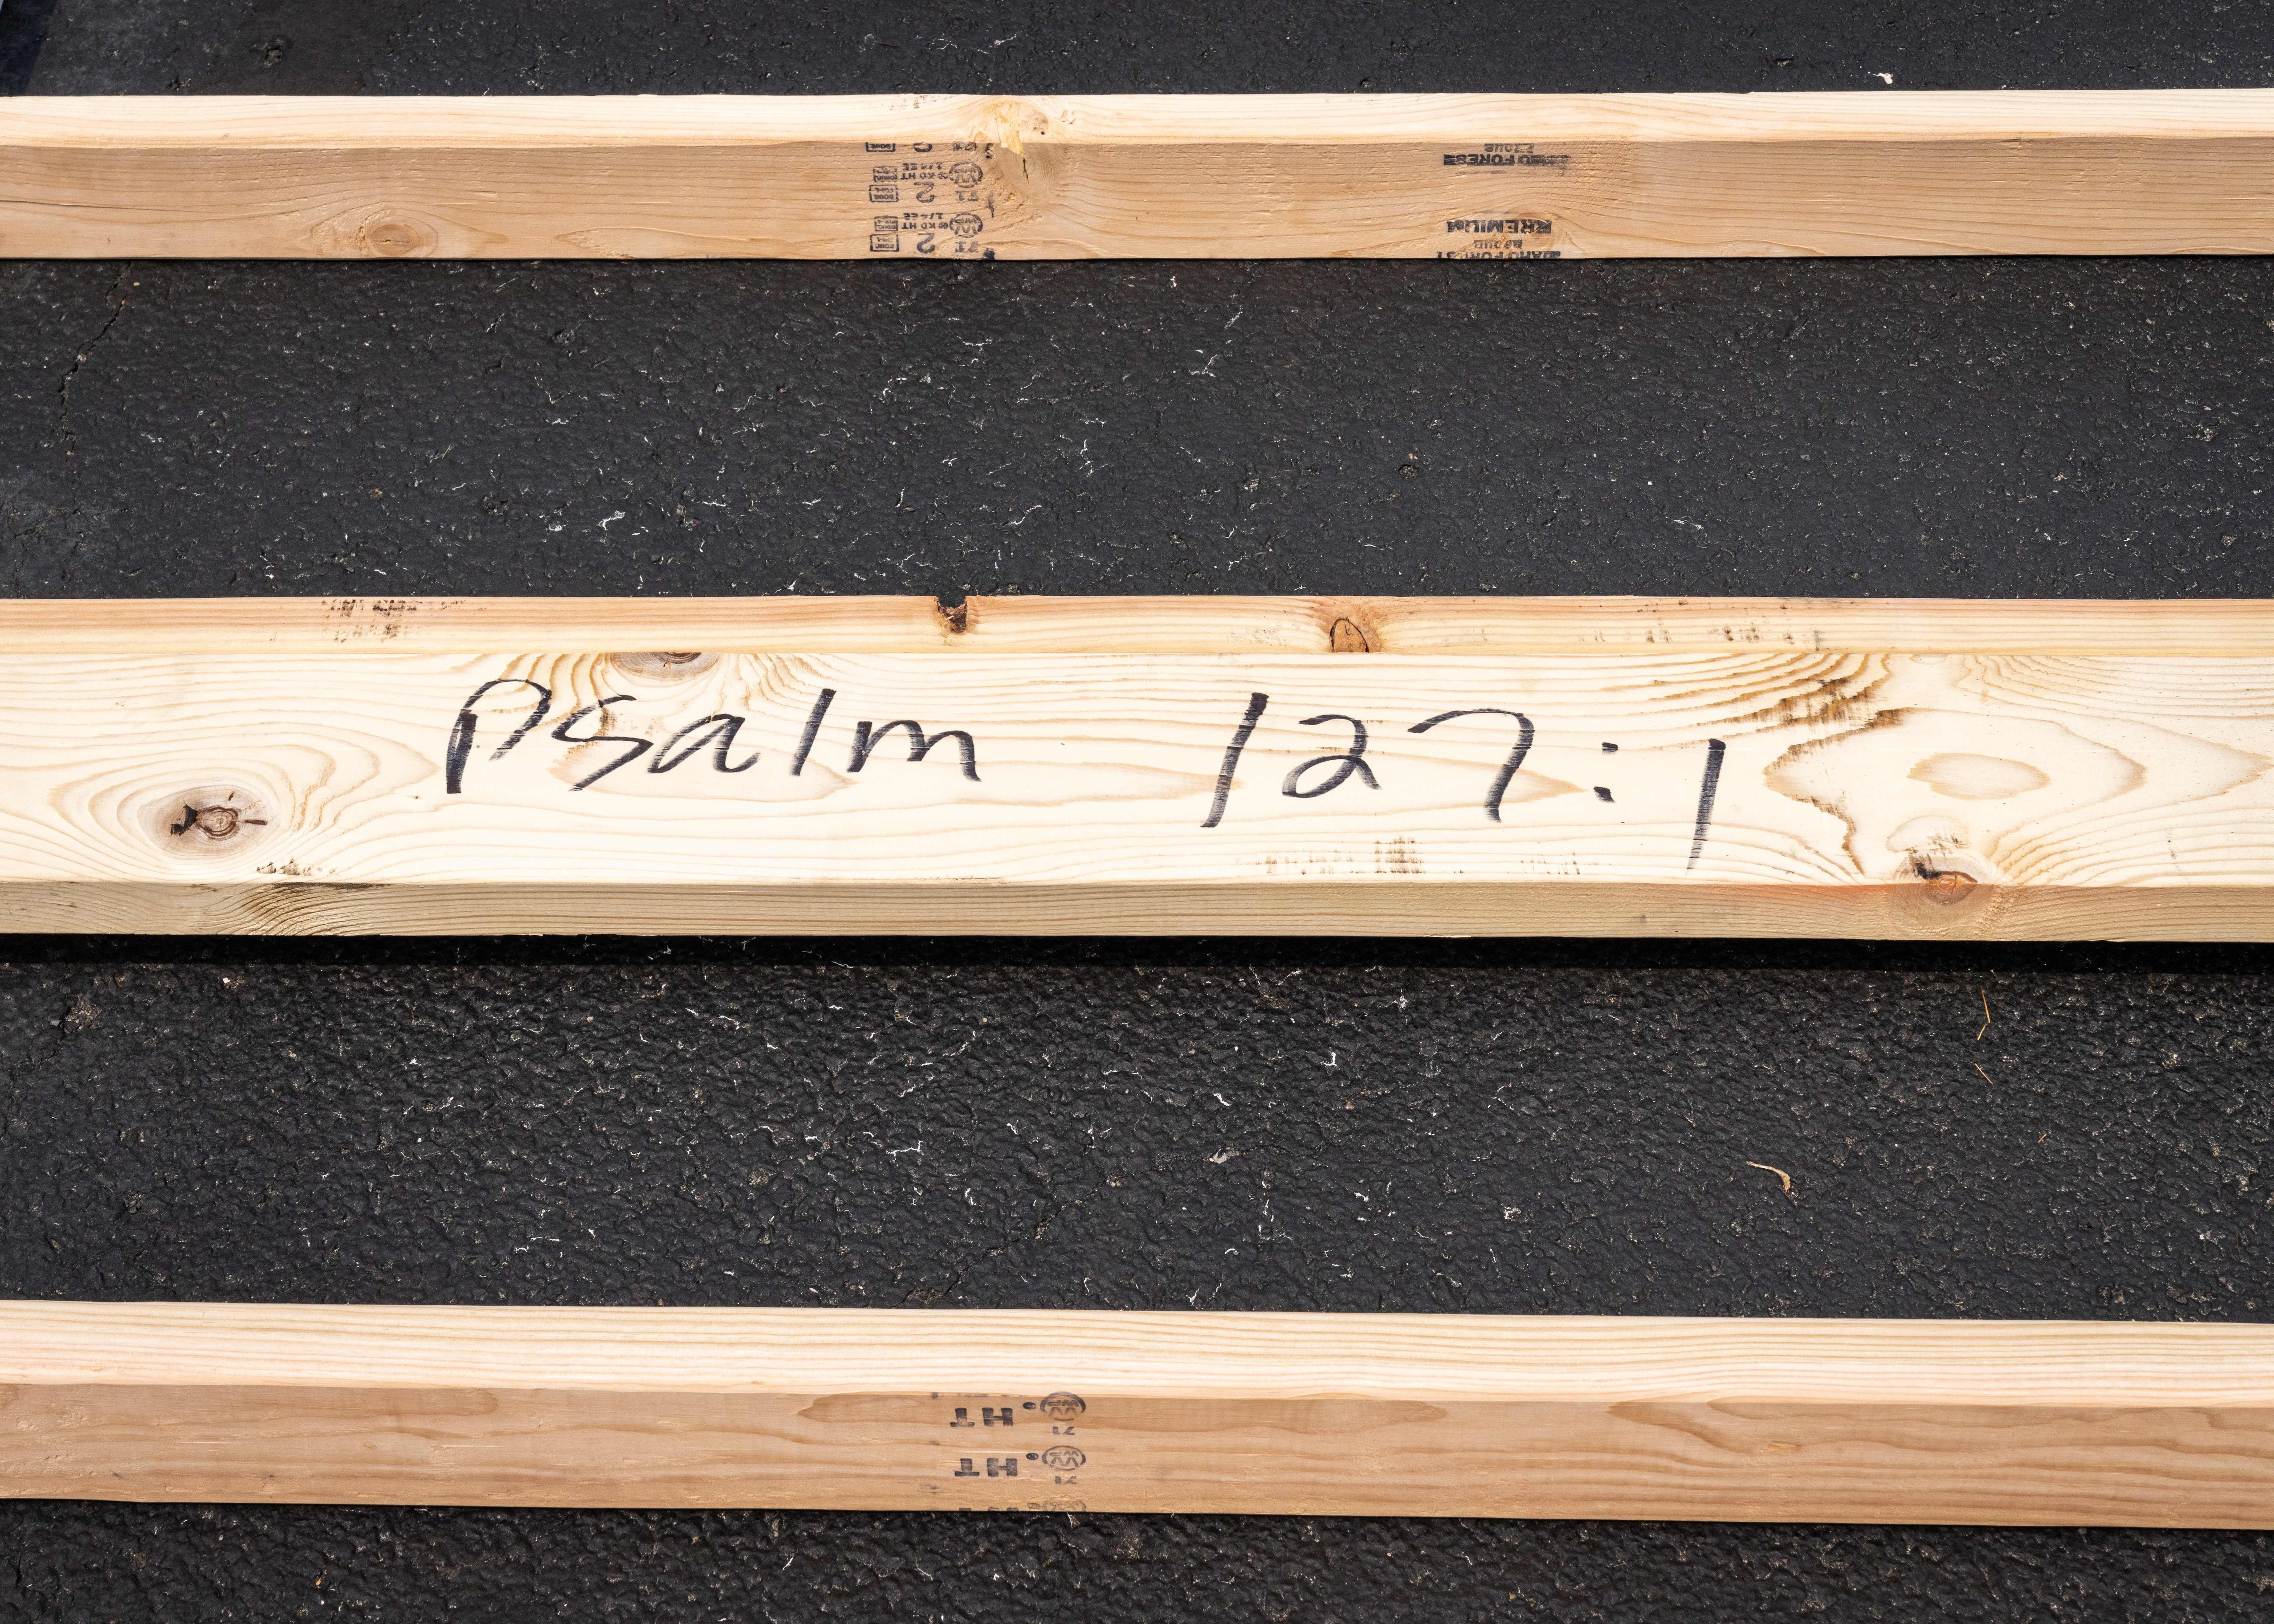 A stud of lumber reads "Pslam 127:15